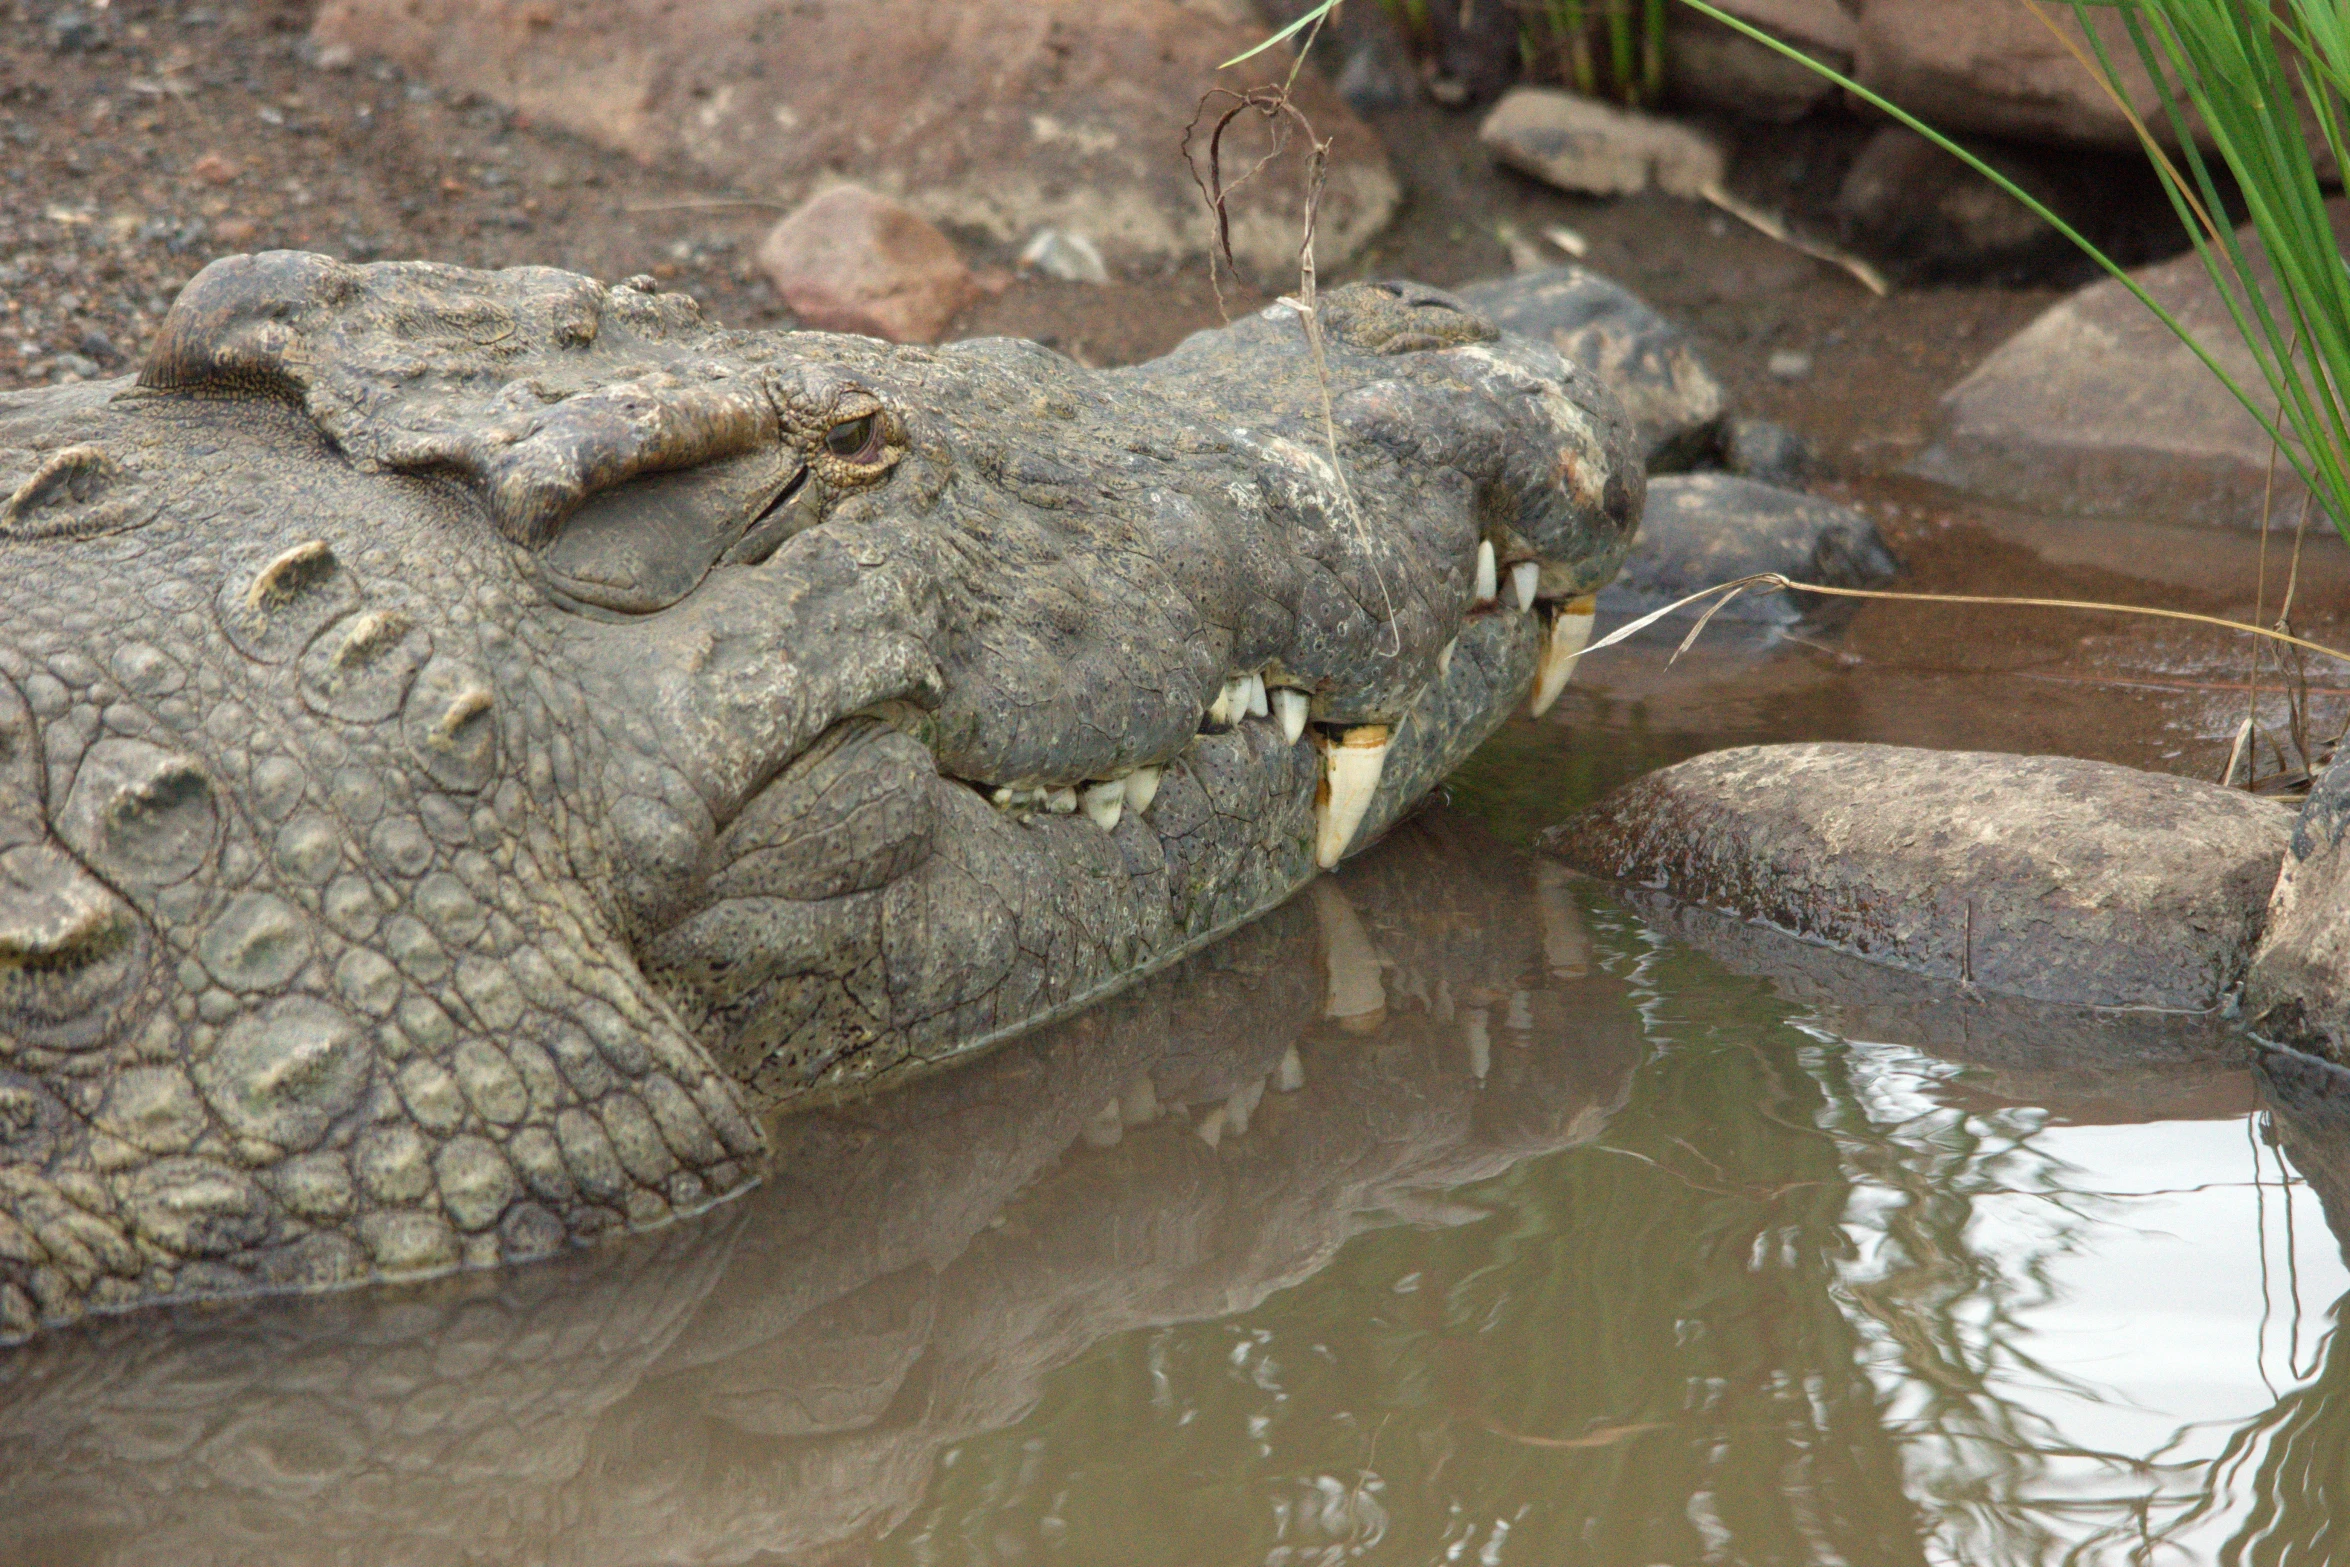 the head of an alligator near a body of water